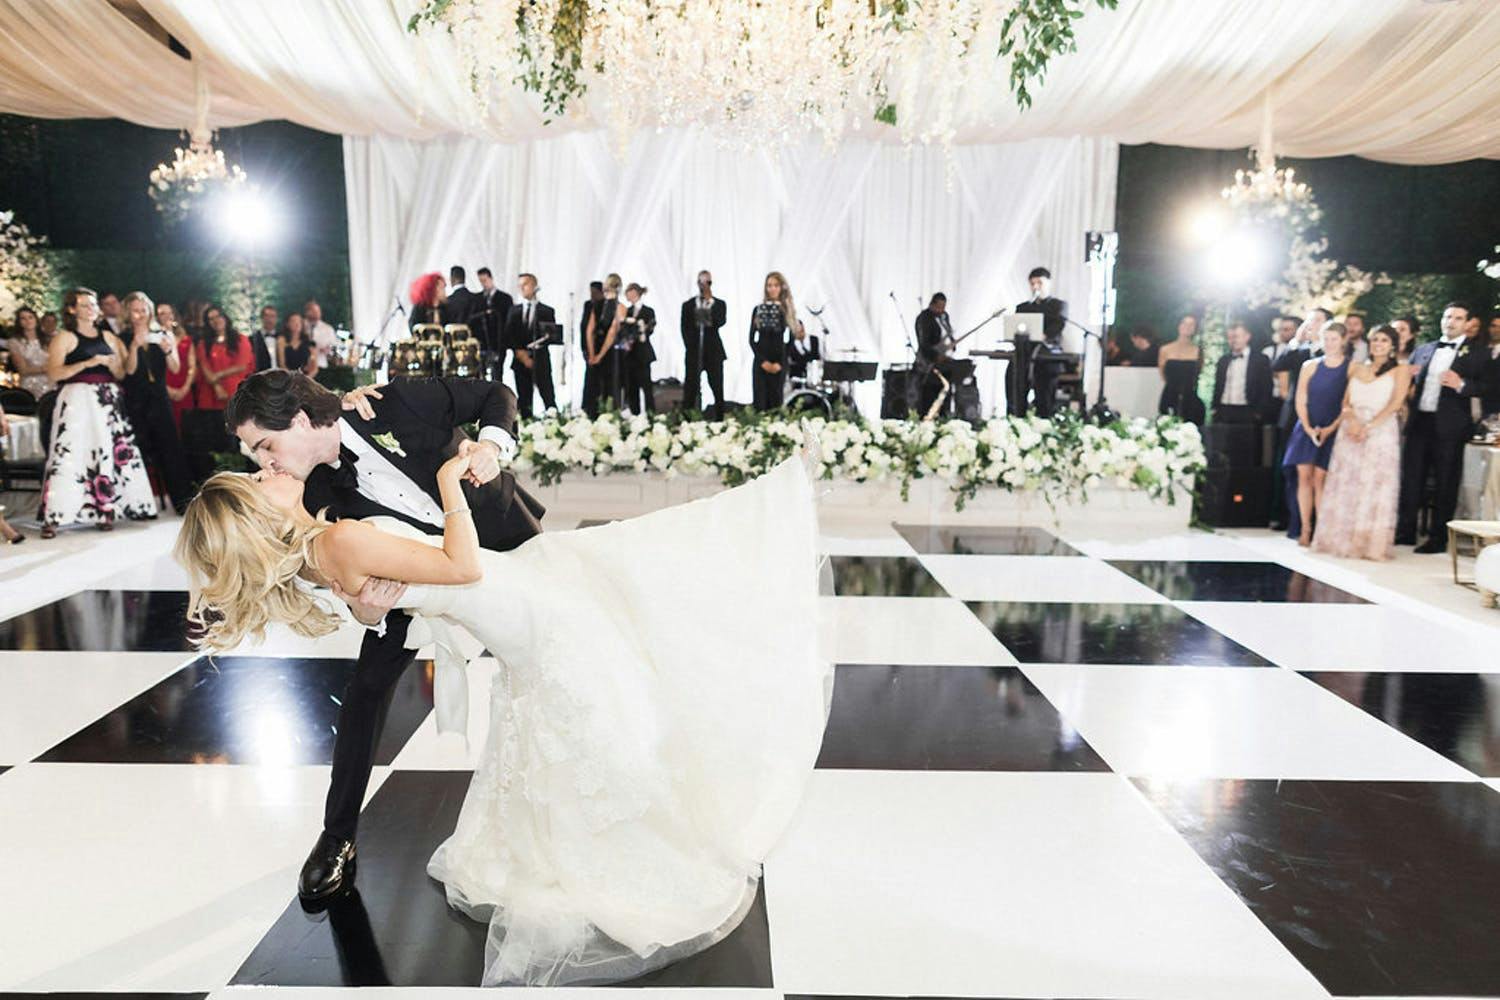 Couple Kisses Mid Dance on Black and White Checkered Dance Floor | PartySlate